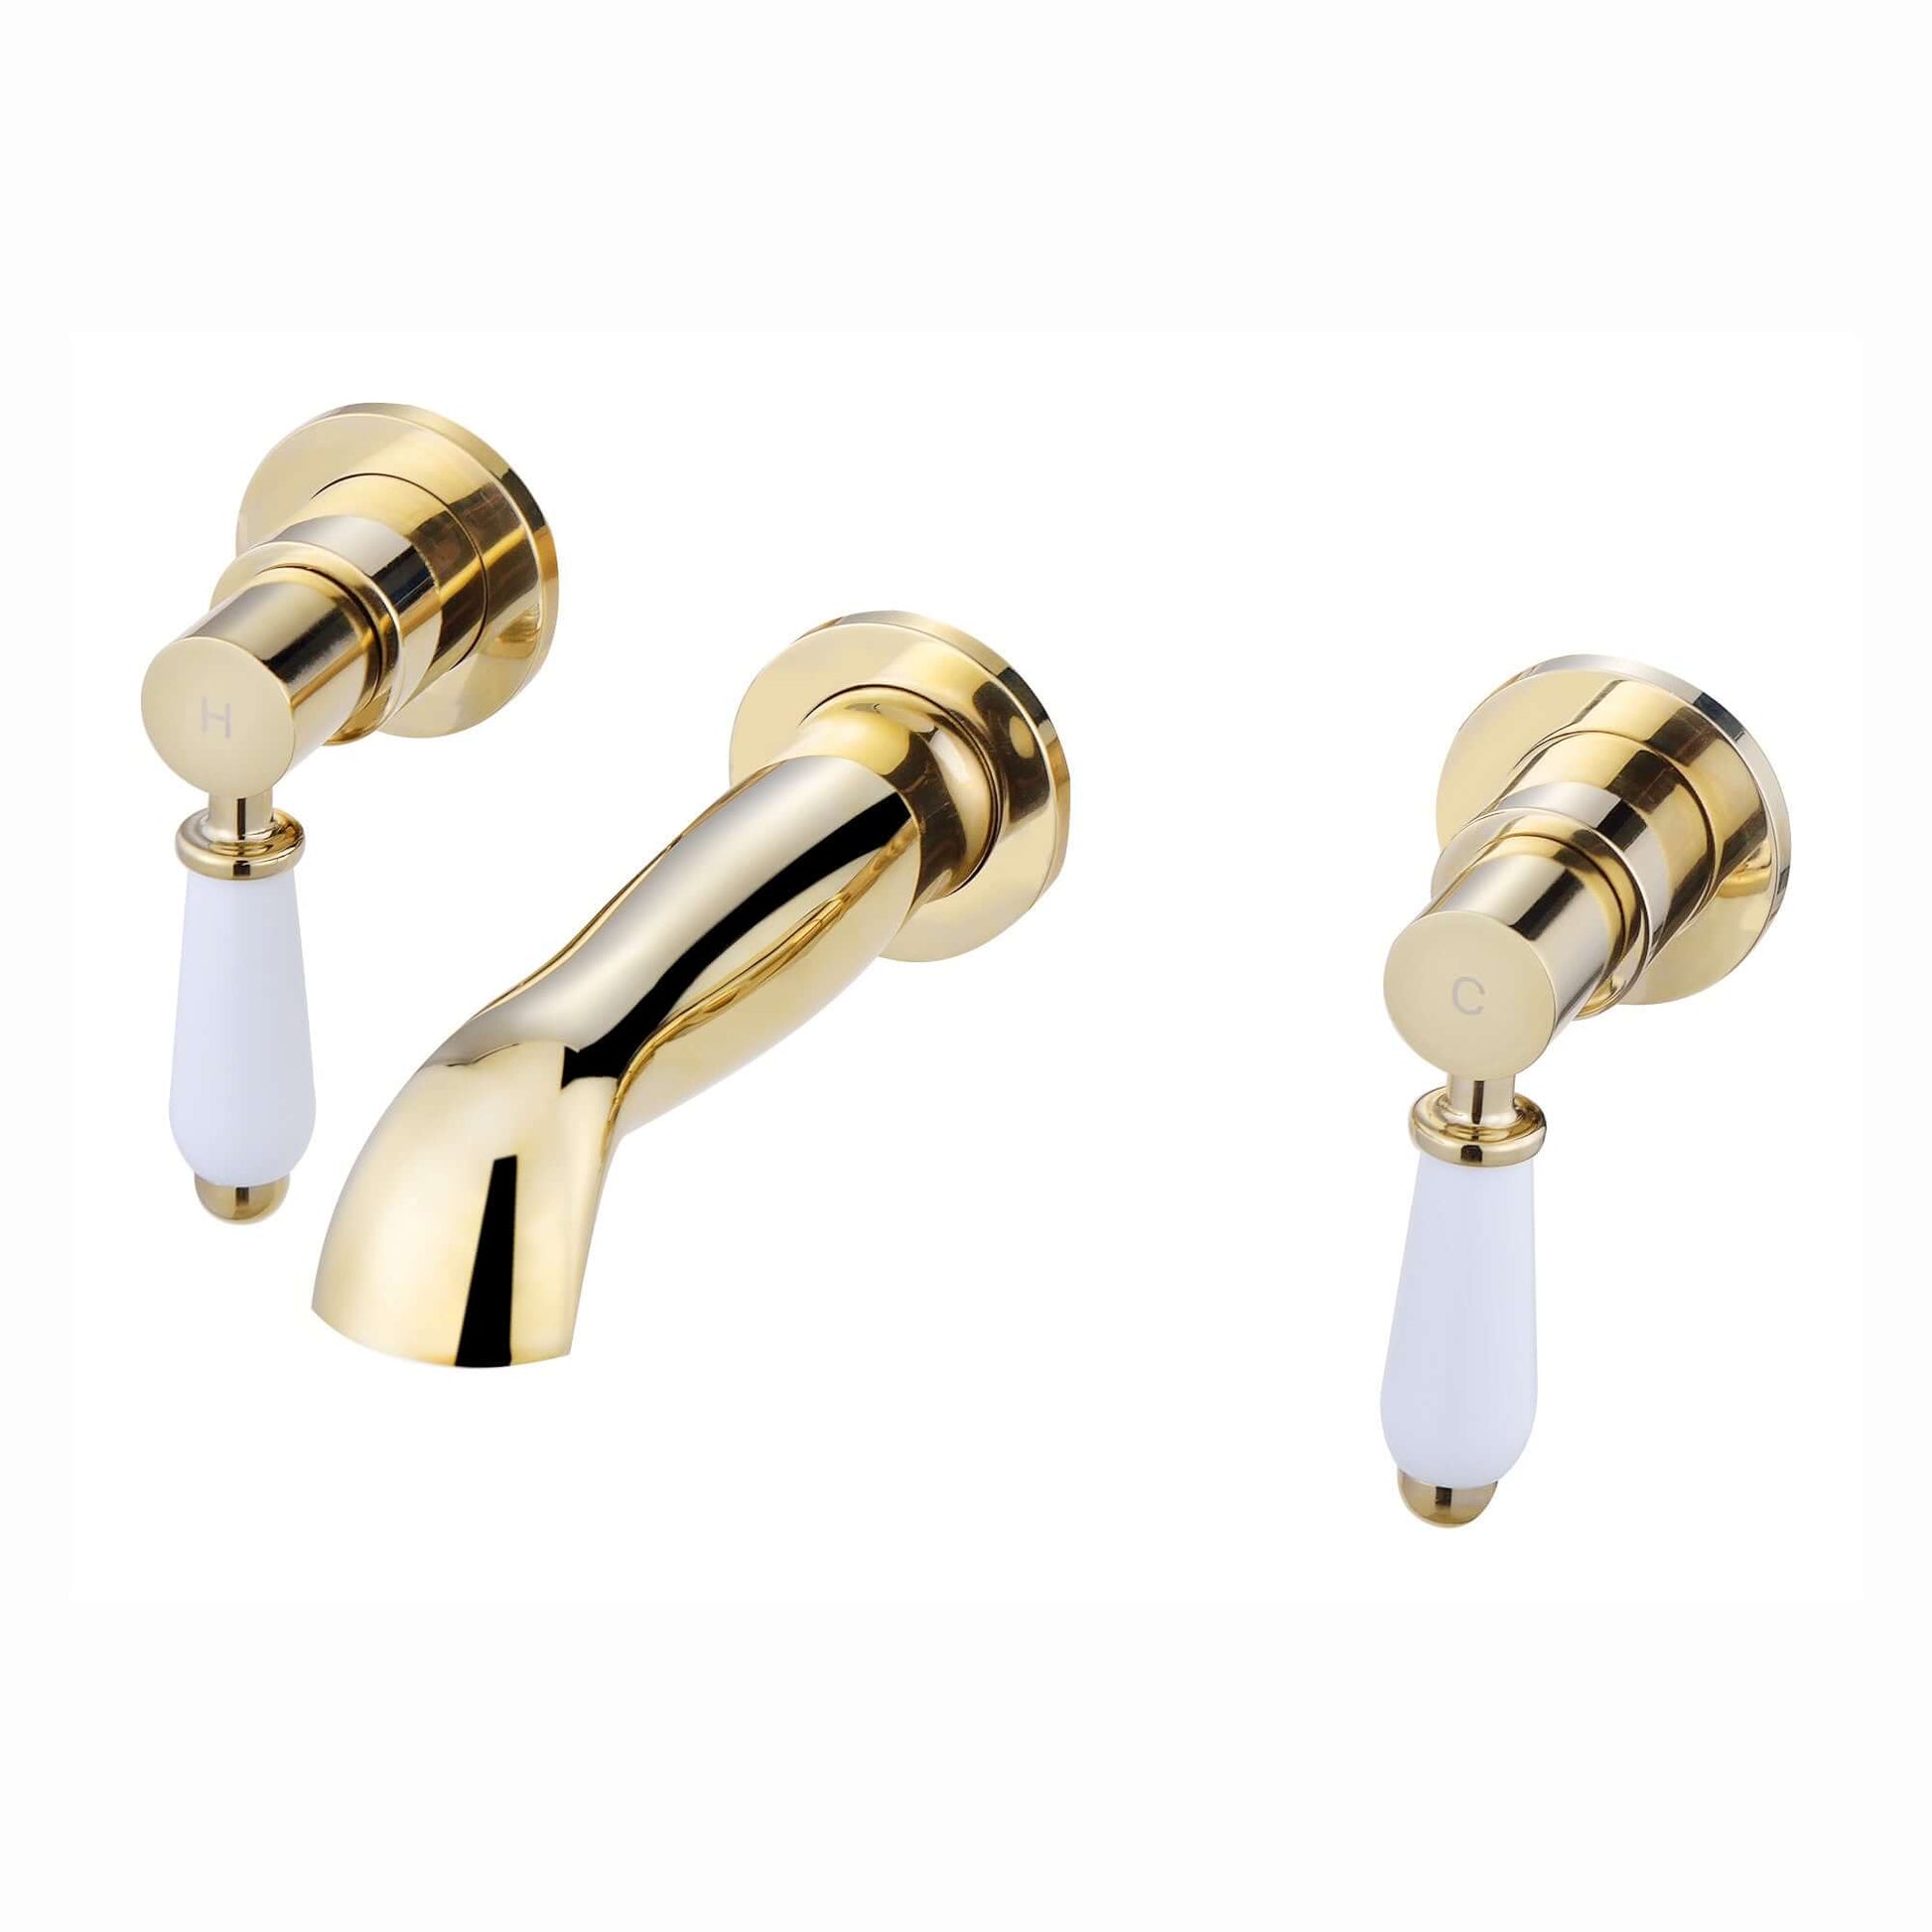 Downton wall-mount basin or bath mixer tap 3 hole with white ceramic levers - English gold - Taps